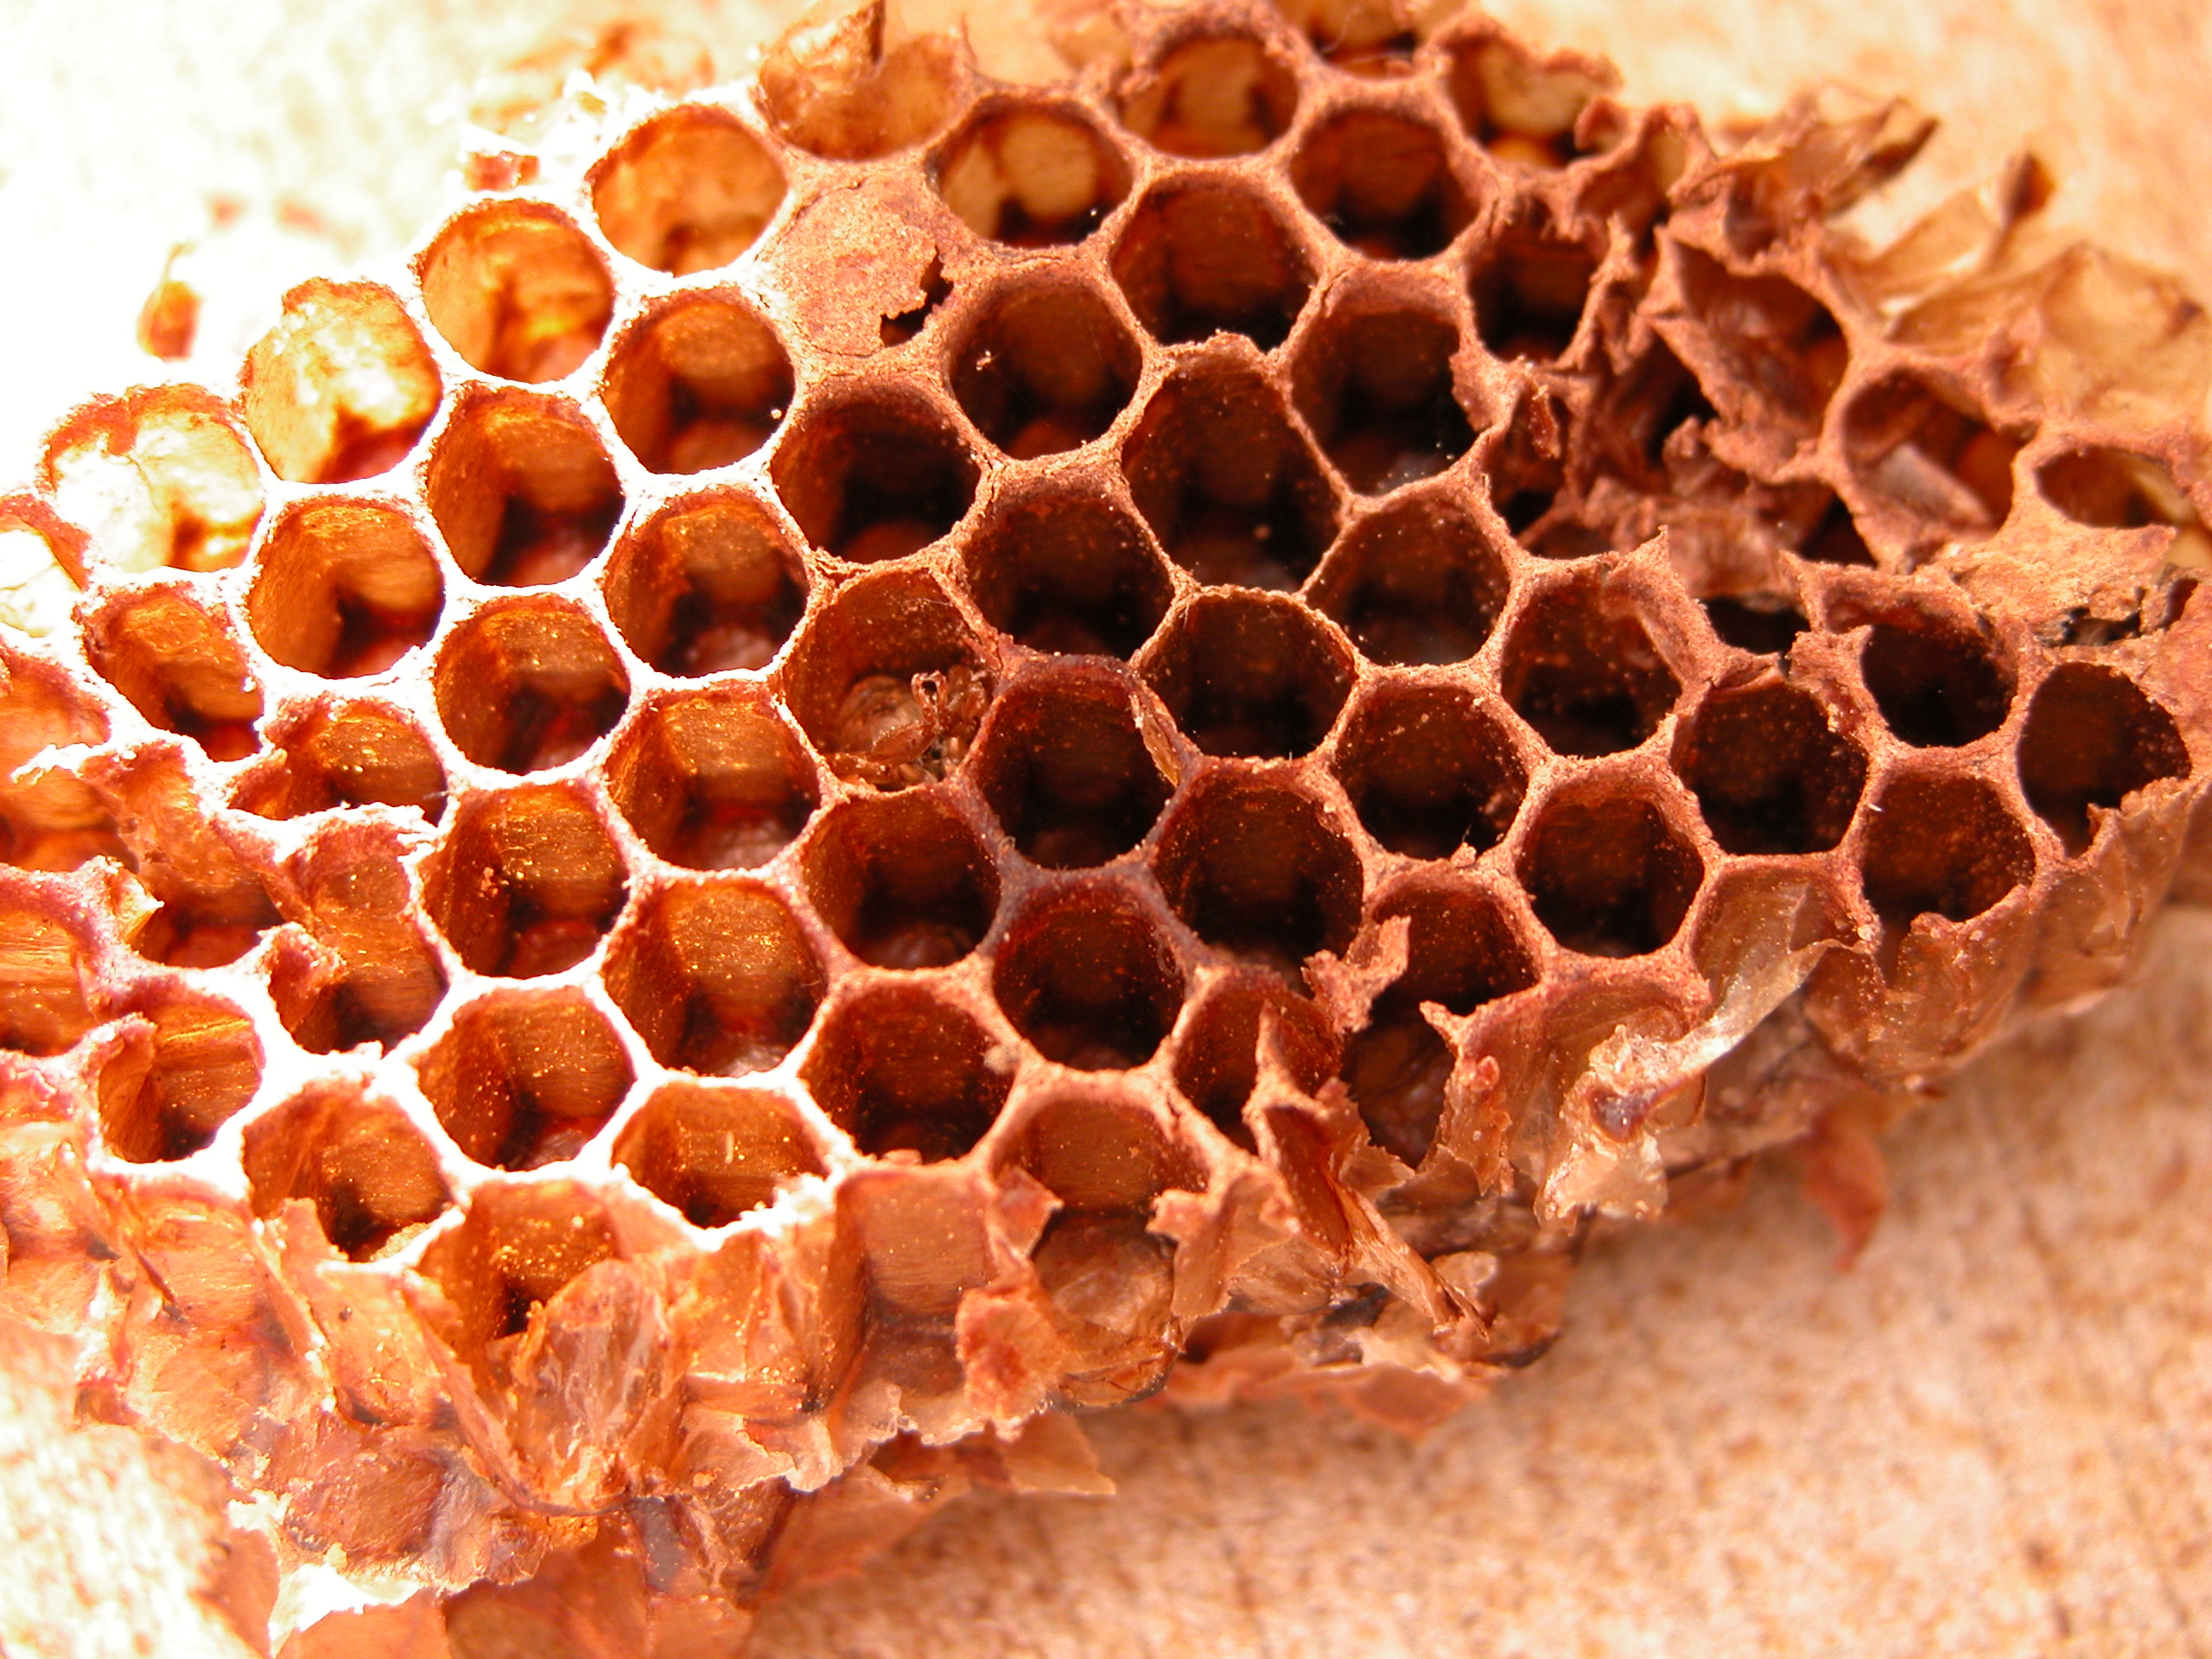 Image*After : images : nature food insects objects honeycomb comb ...